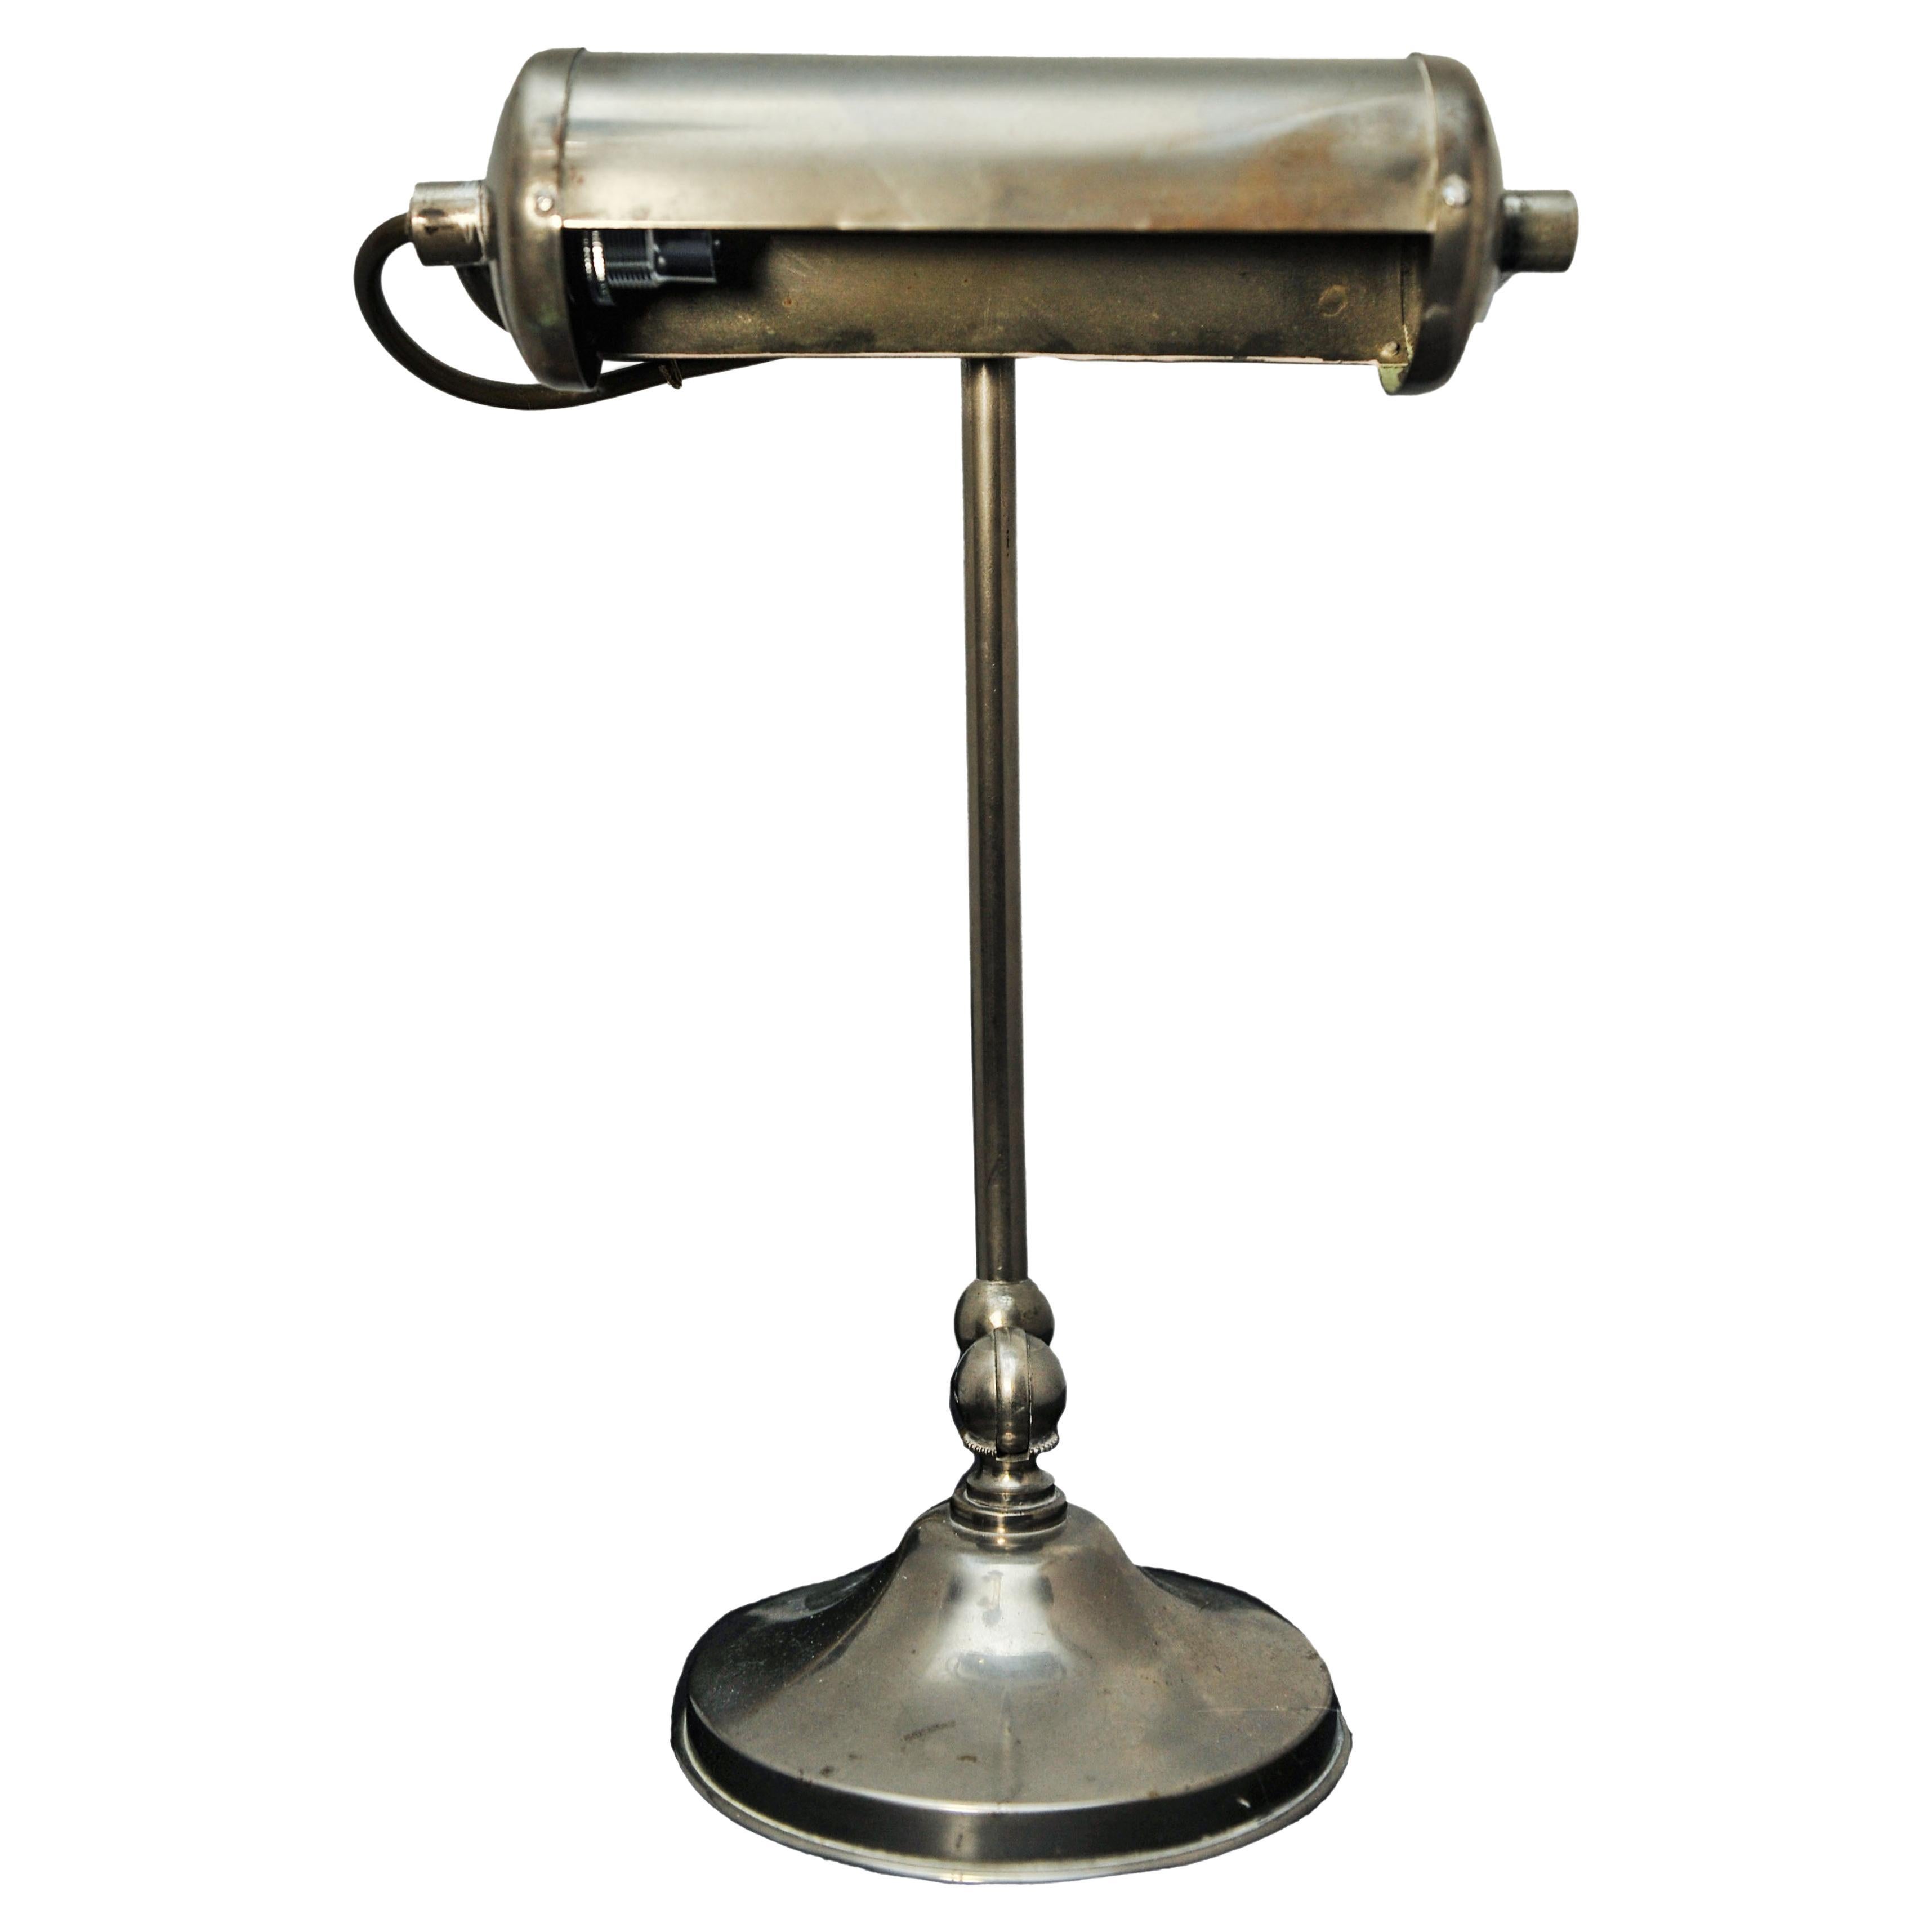 An Art Deco Adjustable Chrome Bankers Desk Lamp On A Circular Base. Manufactured In 1920's.
